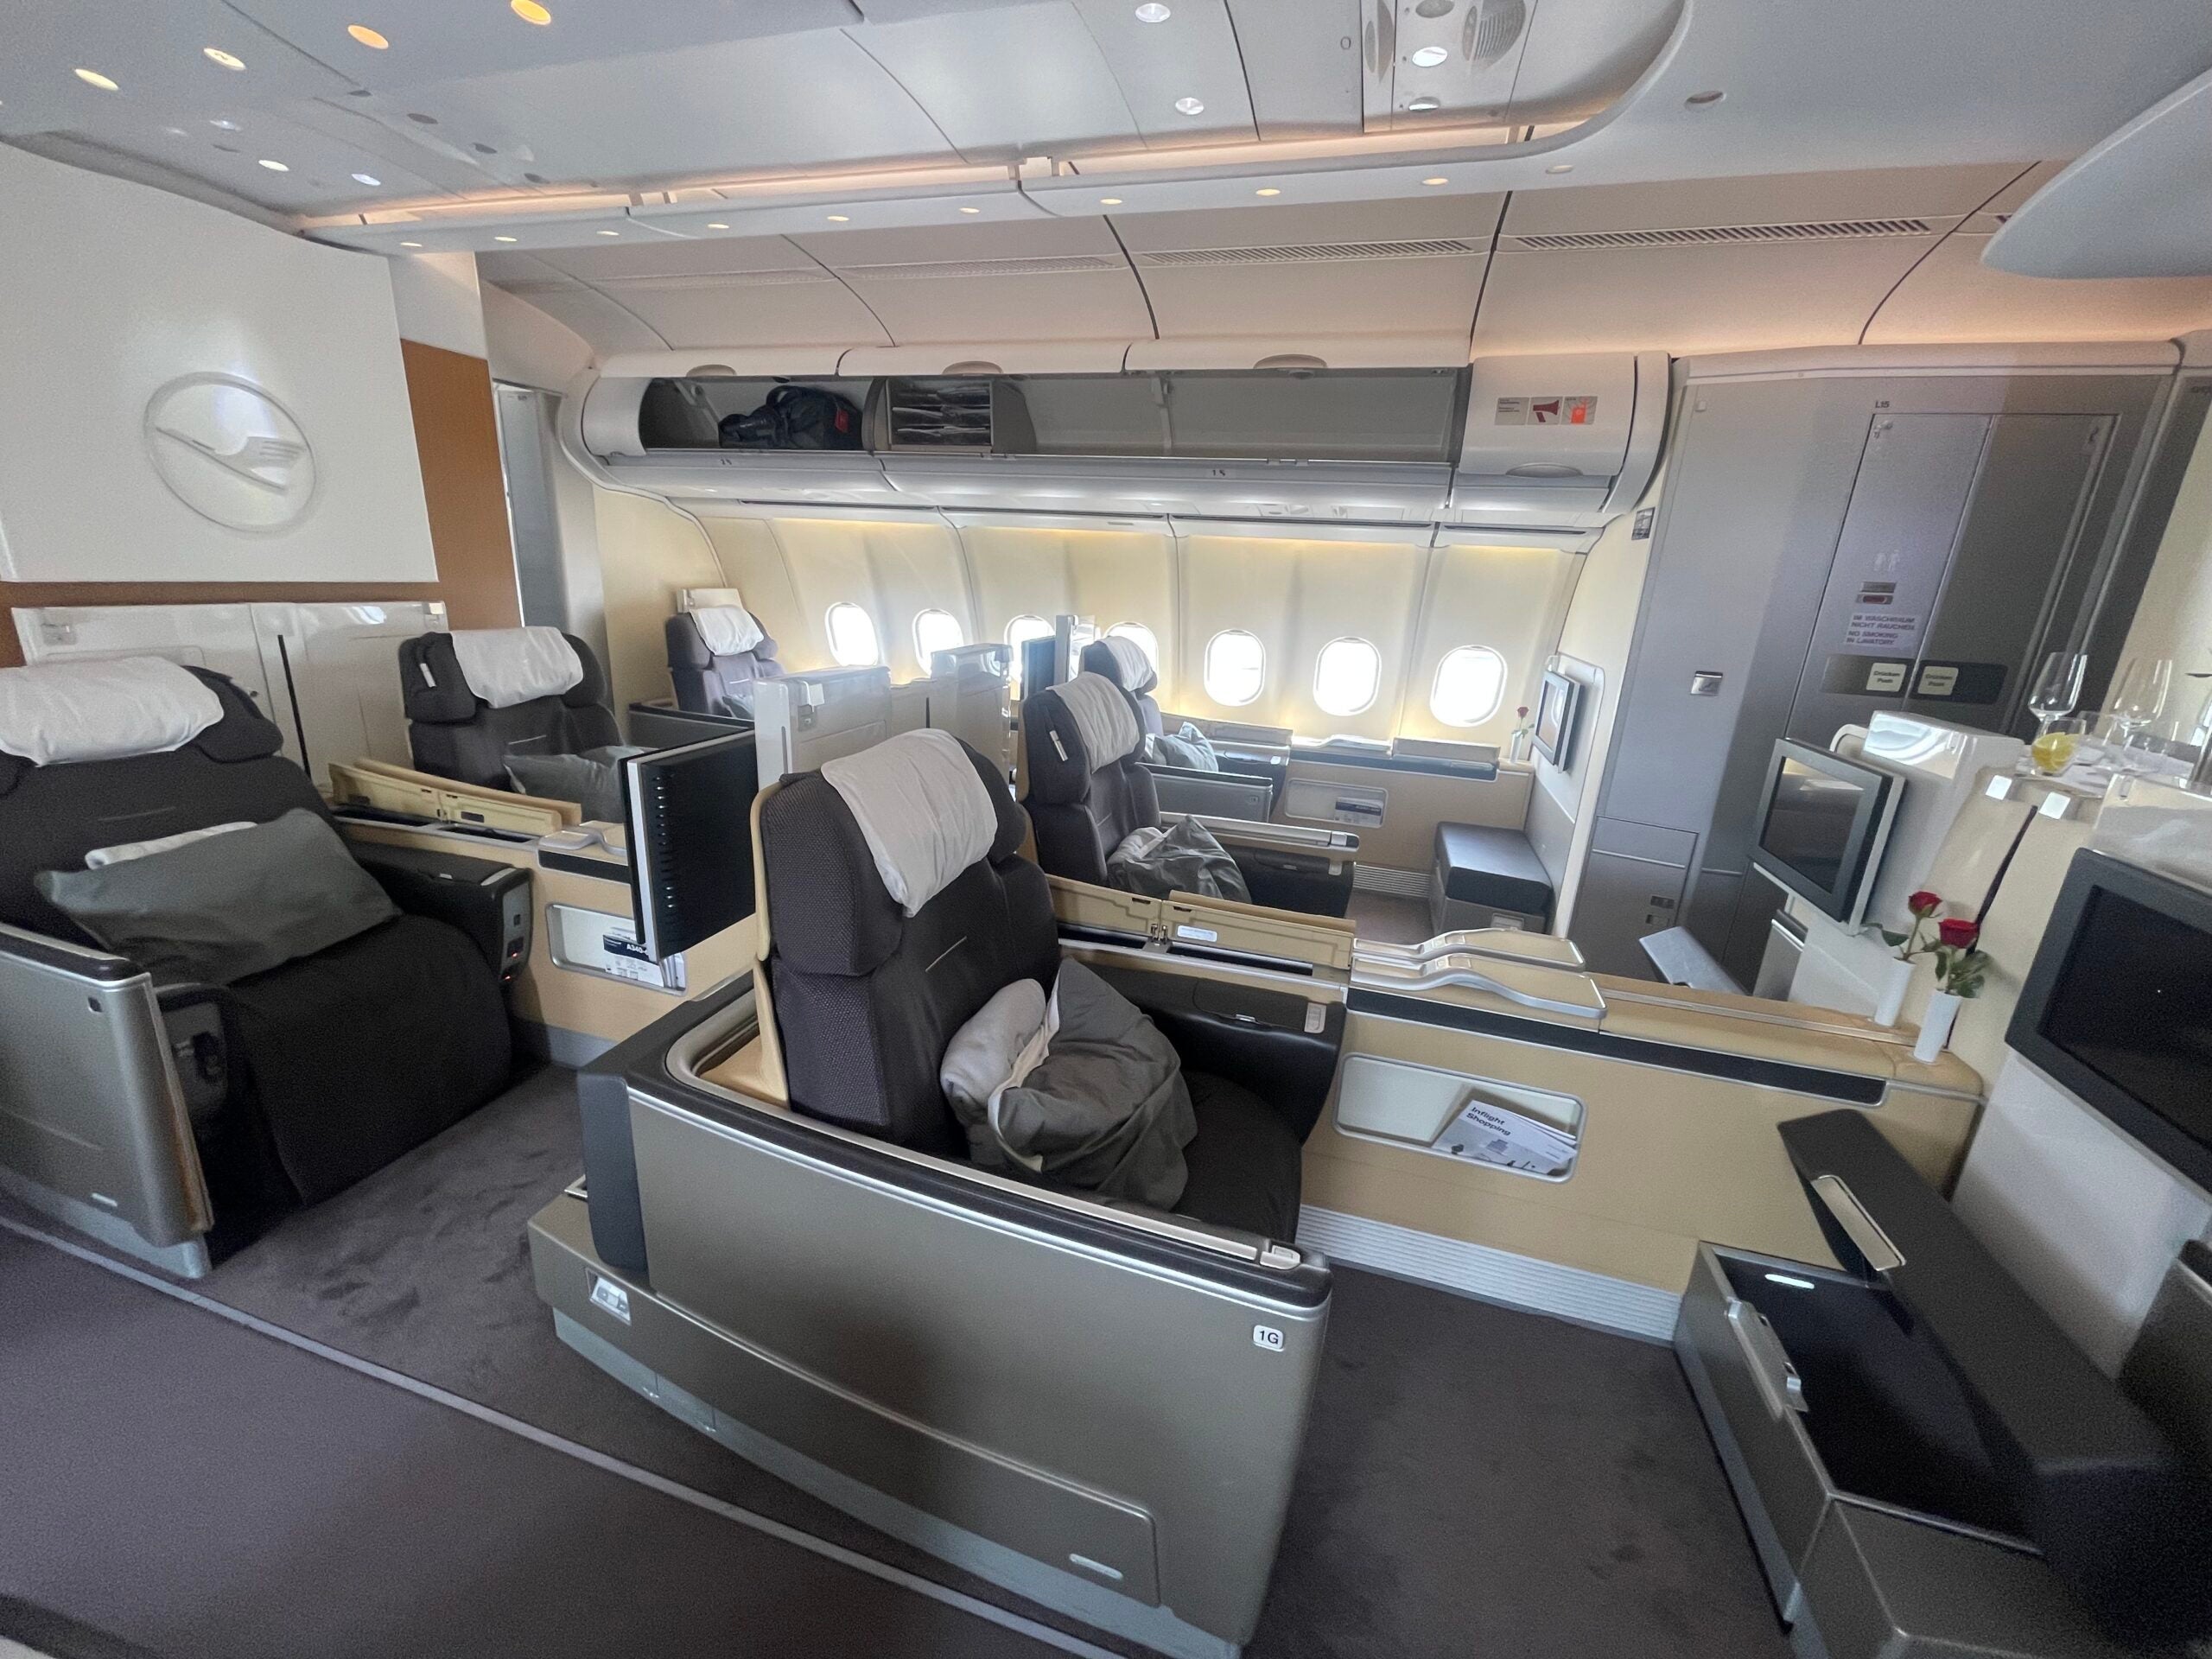 first class travel in the us